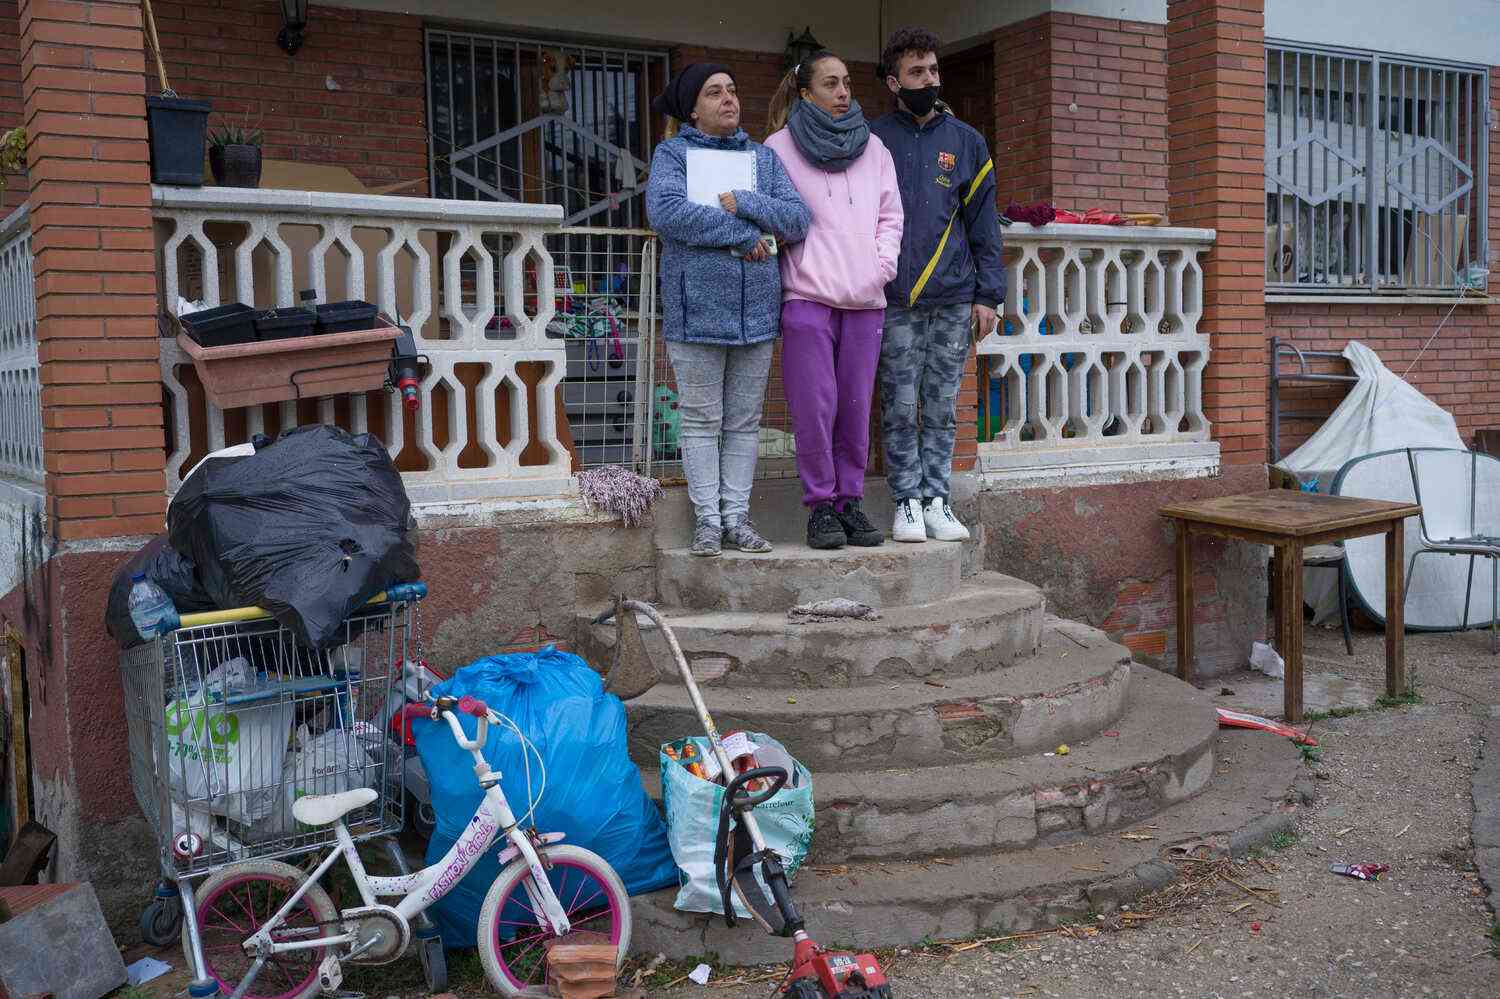 ‘Don’t be afraid, freedom’: Yarn bomb against evictions in Spain